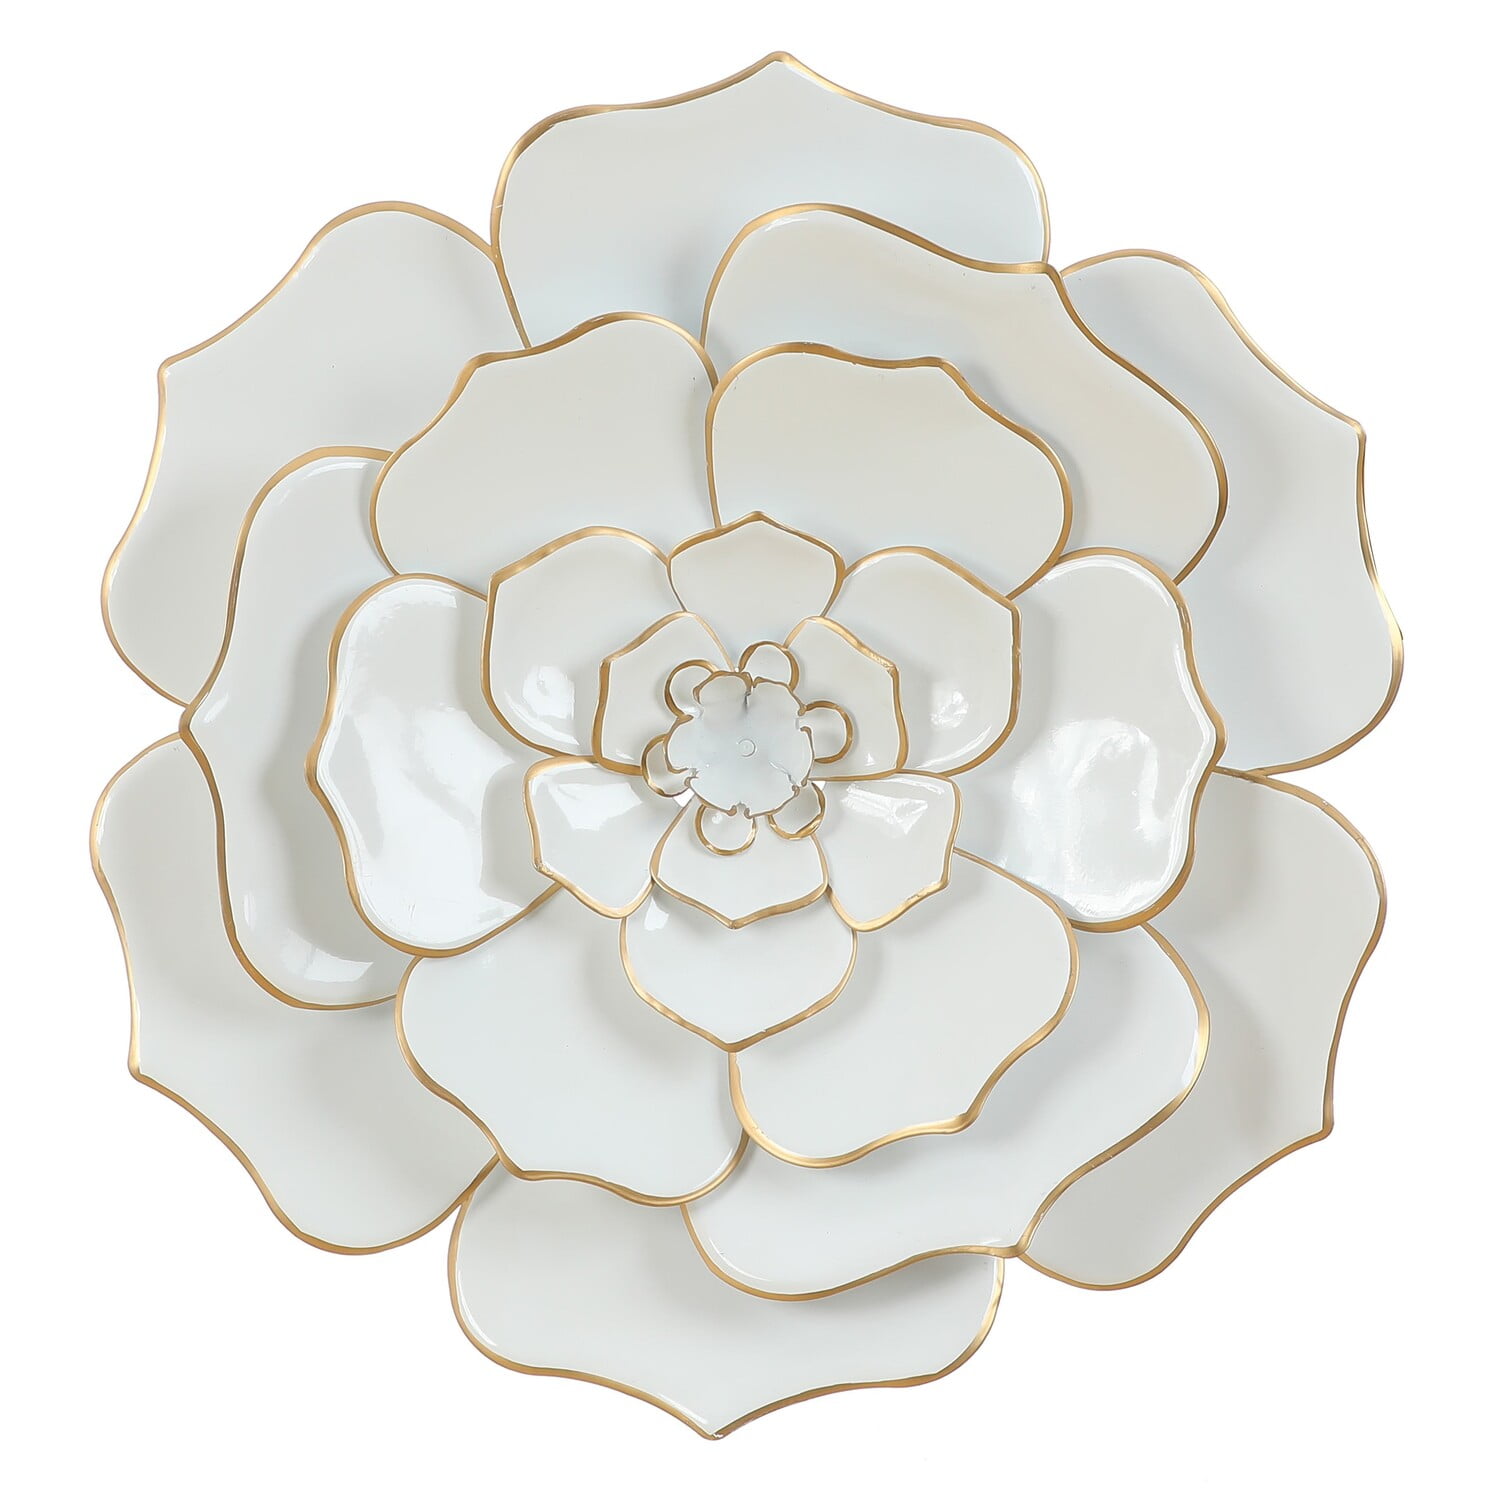 LuxenHome White and Gold Flower Metal Wall Decor